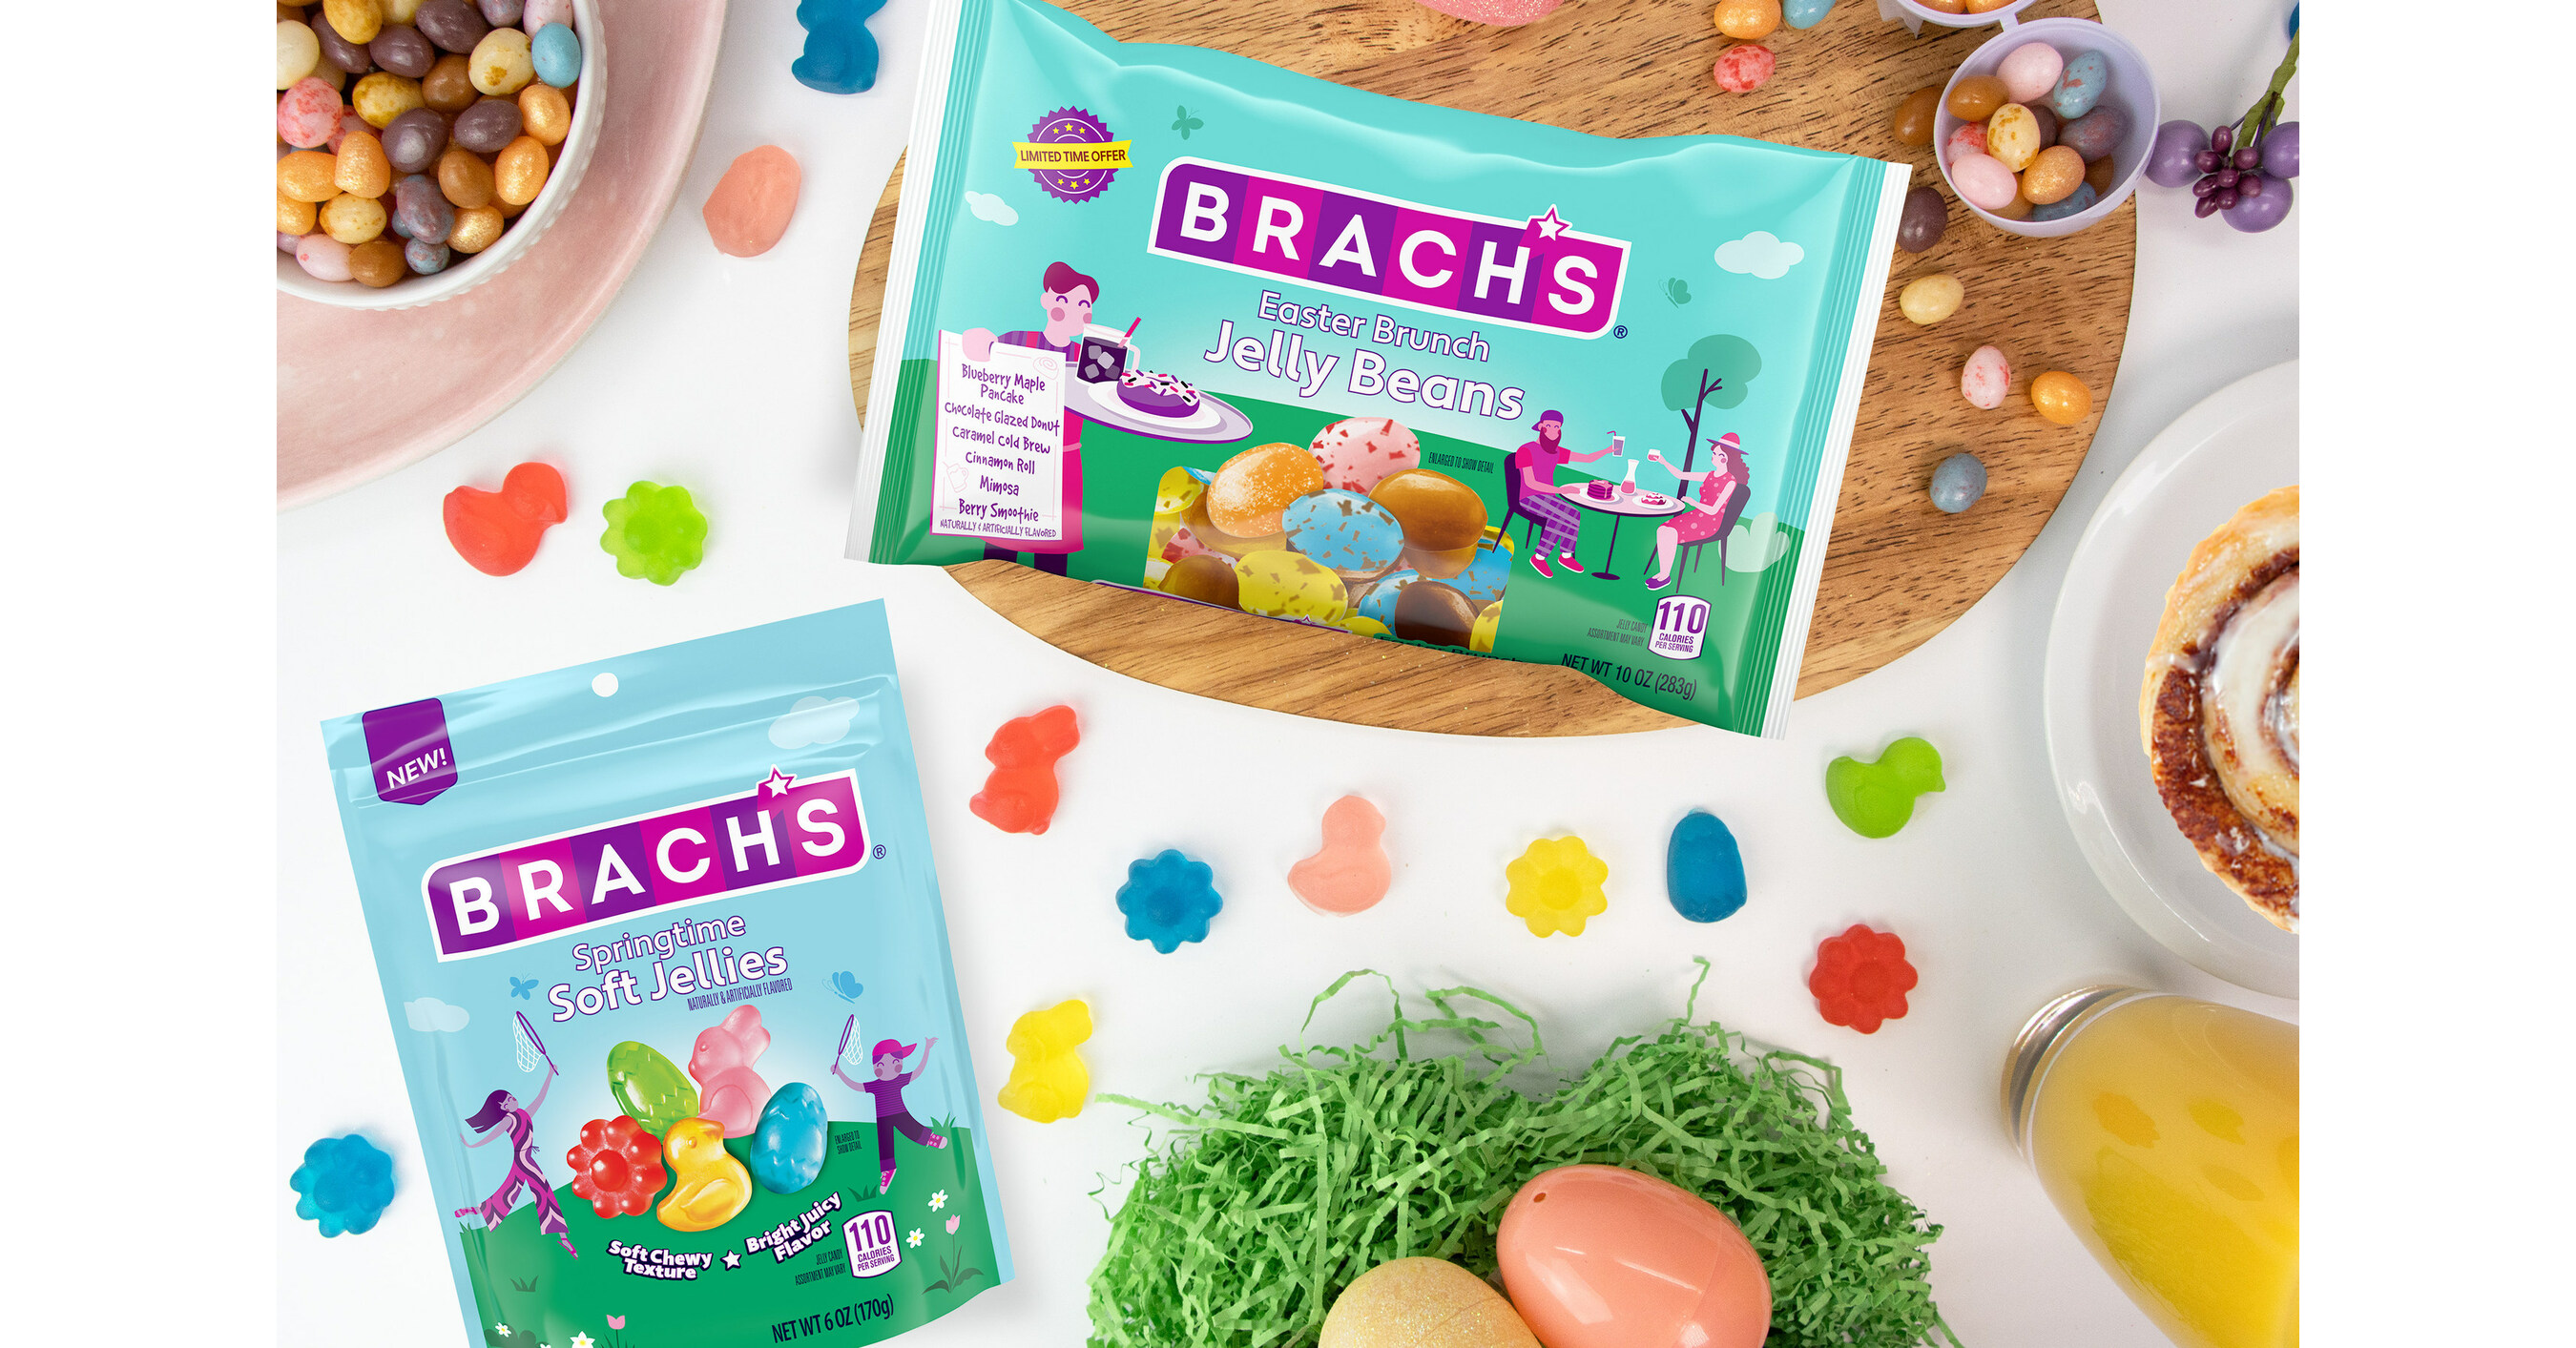 Just In Time for Springtime Celebrations, BRACH'S® Launches New Easter  Brunch Jelly Beans with Flavors Inspired by All Your Favorite Breakfast  Treats